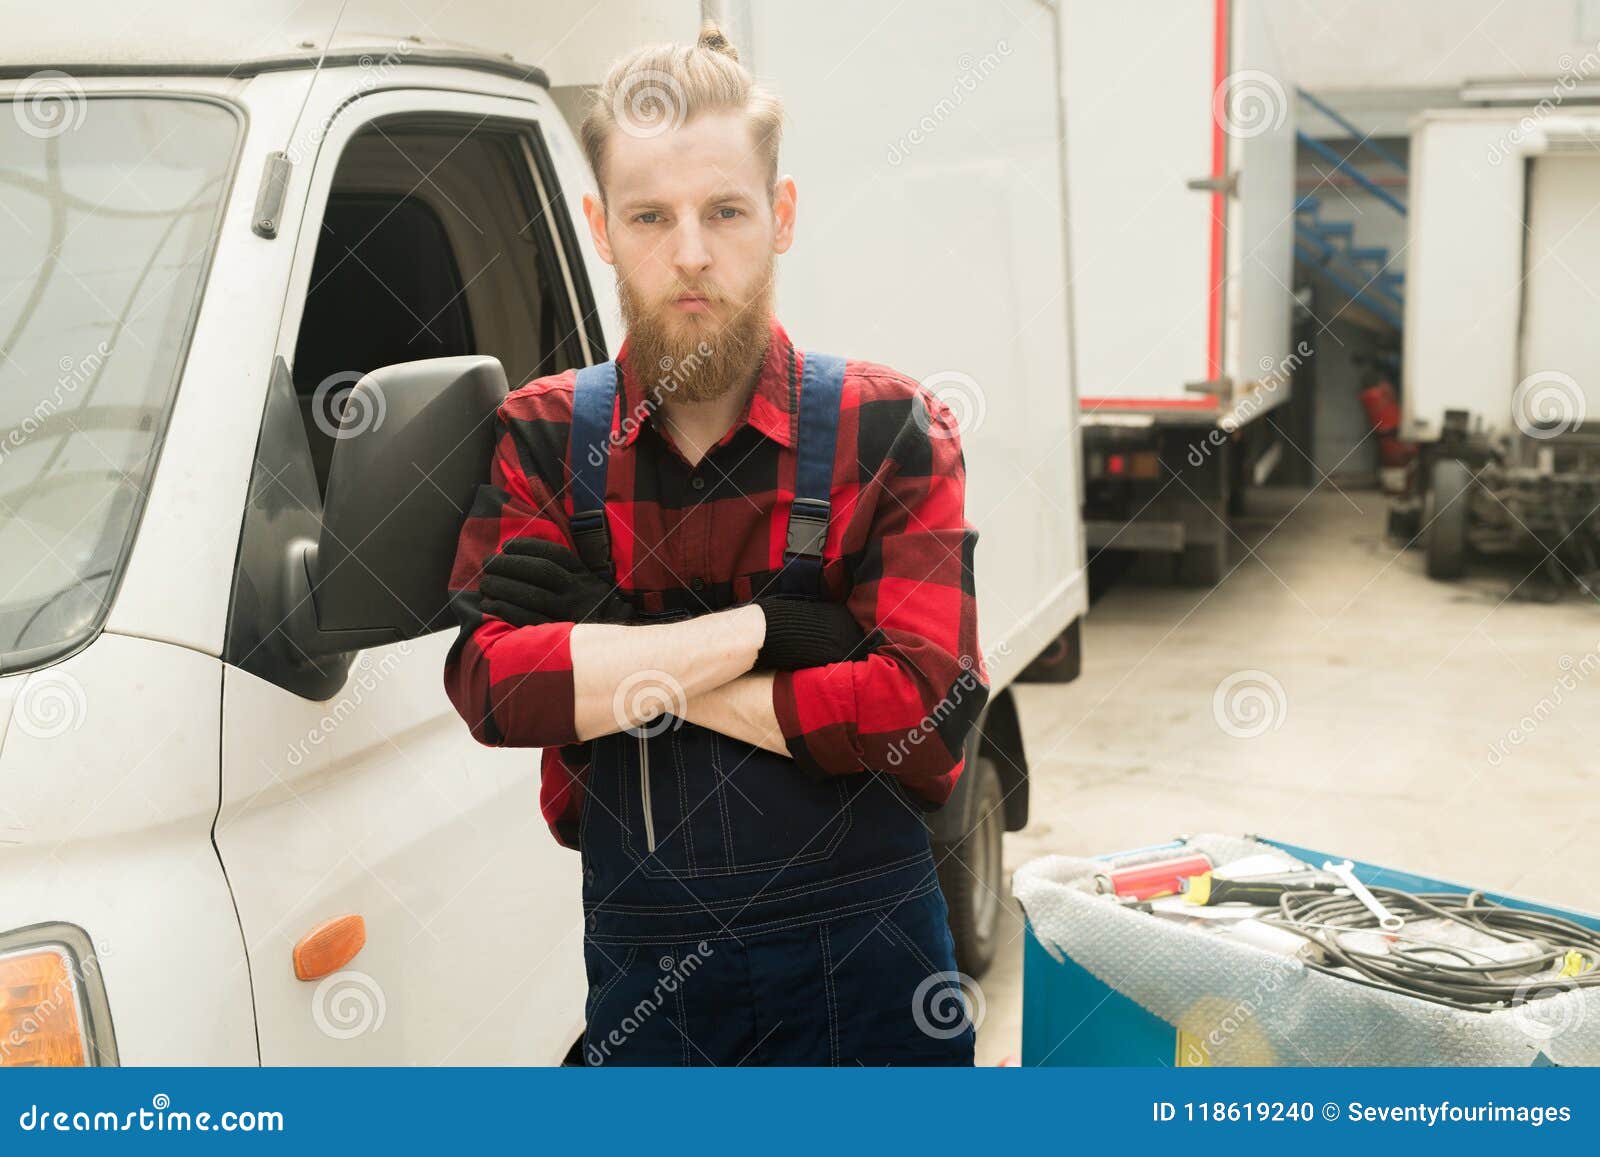 Handsome Car Mechanic At Work Stock Photo Image of looking, confident